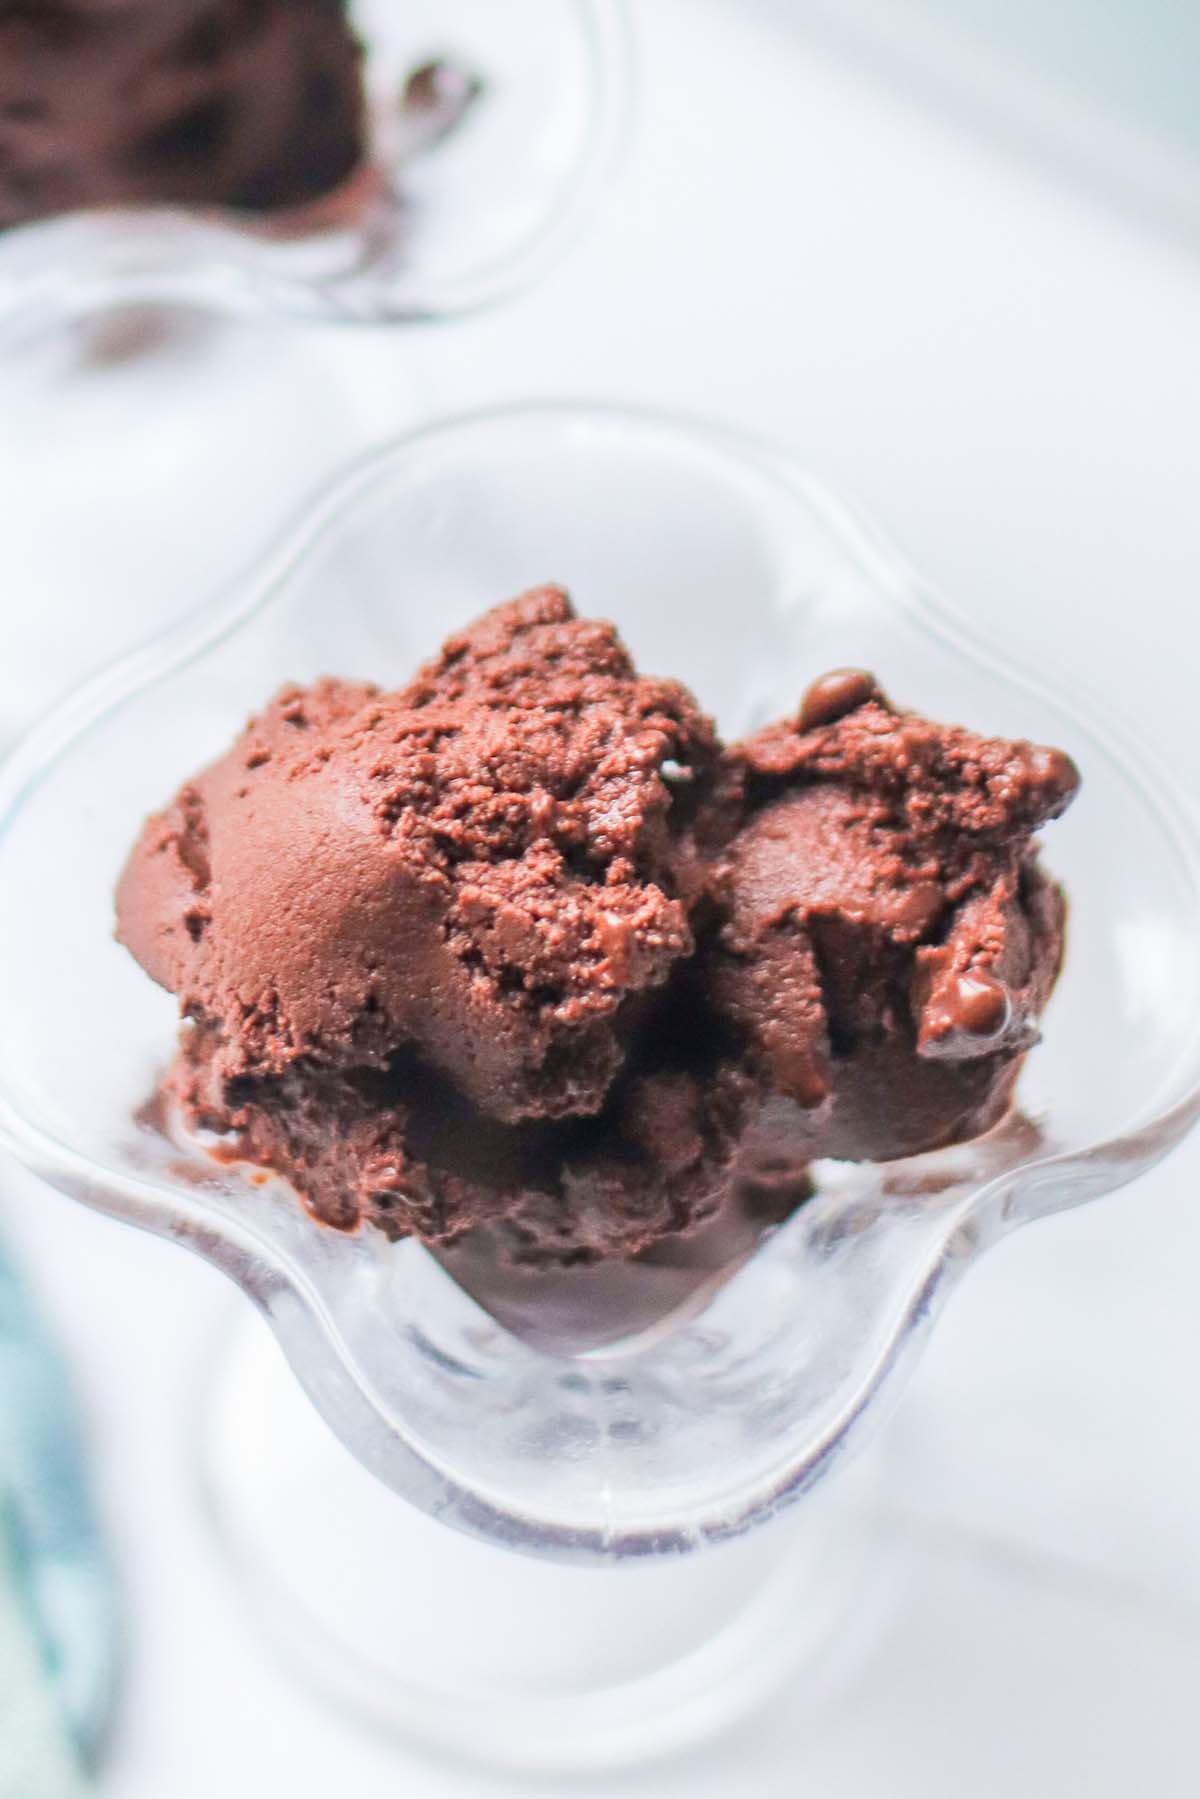 Chocolate sorbet scoops in a glass dish.